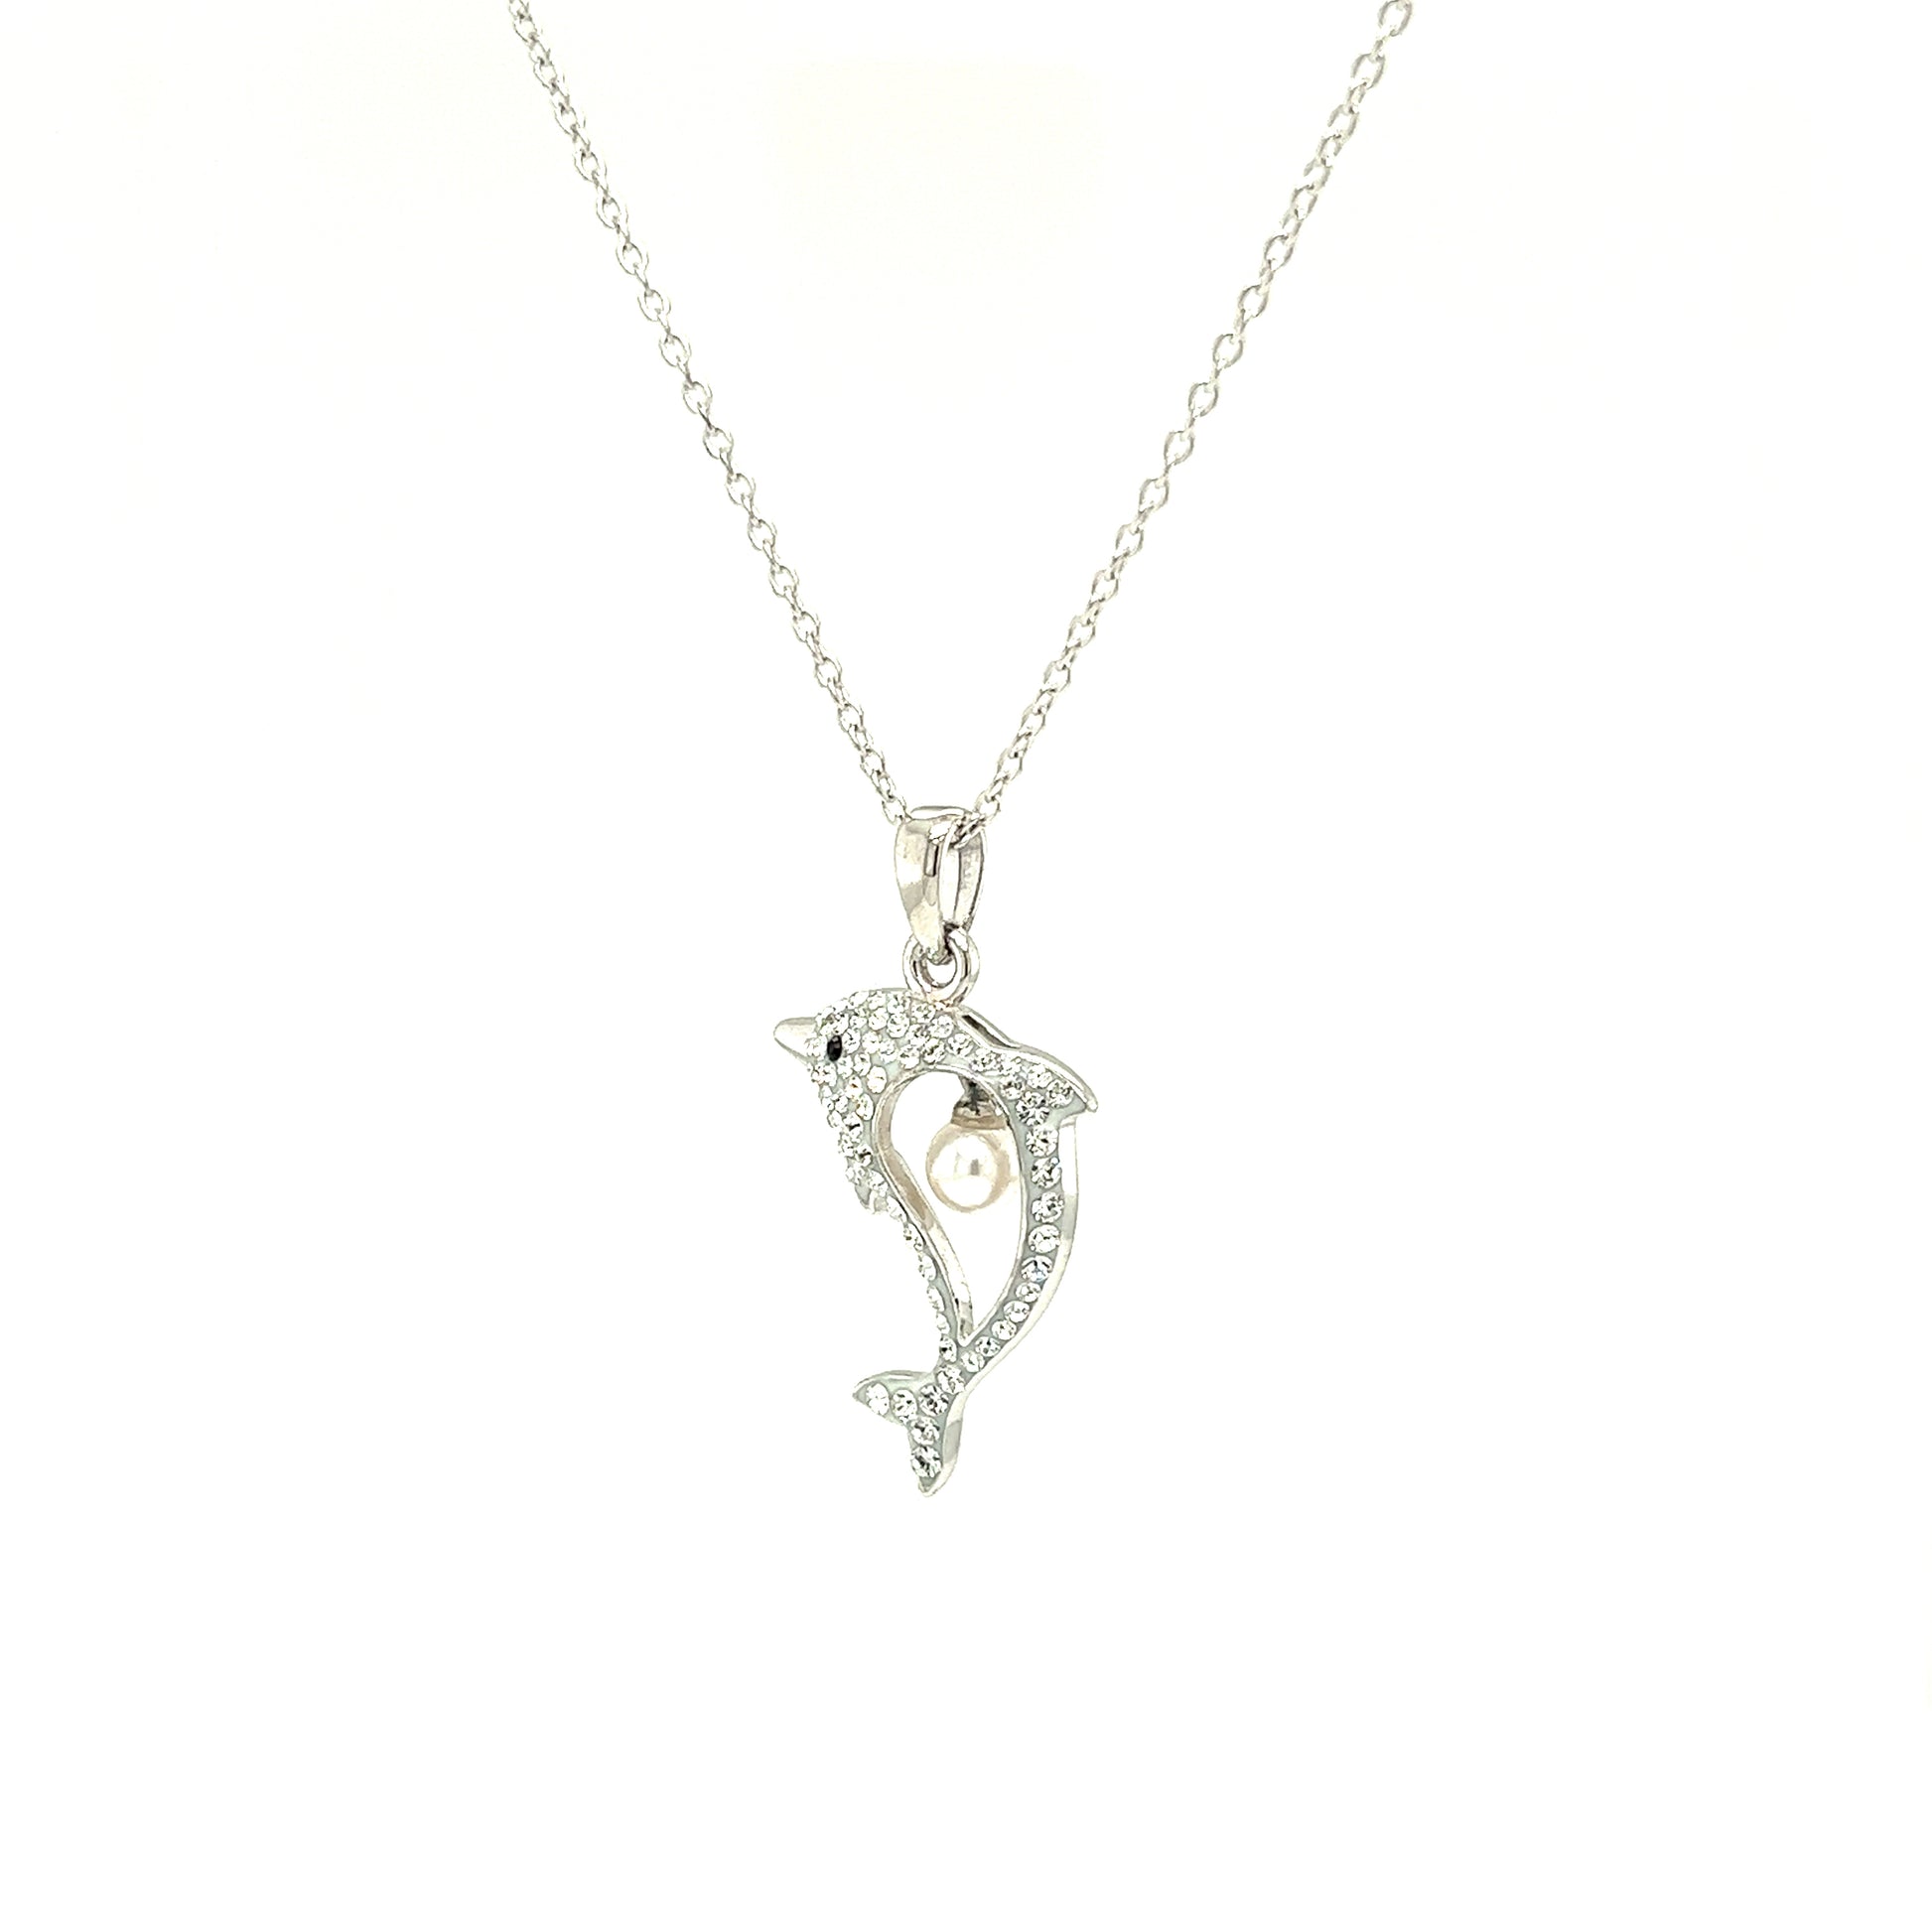 Dolphin Necklace With 4mm White Pearl and White Crystals in Sterling Silver Left Side View